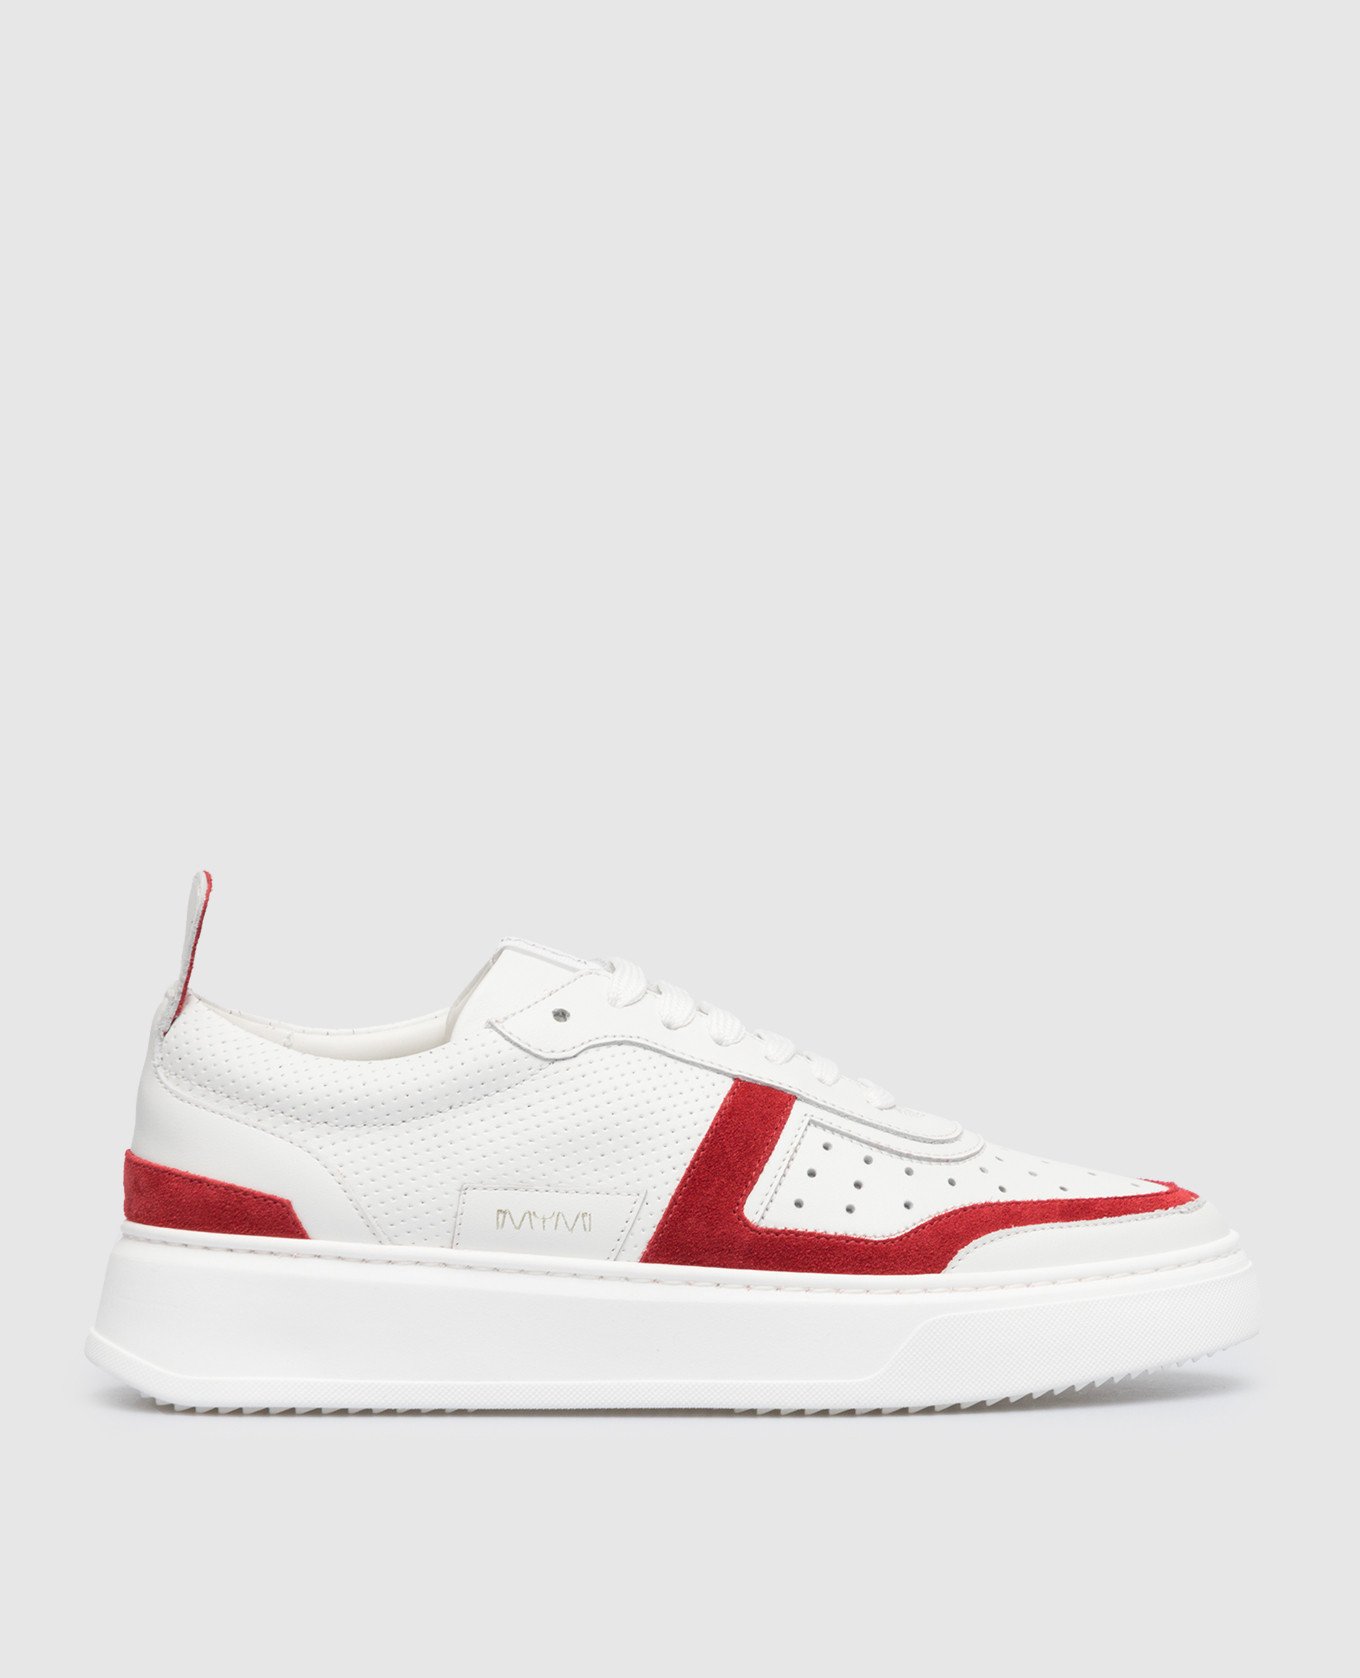 Mytyc White Perforated Leather Sneakers